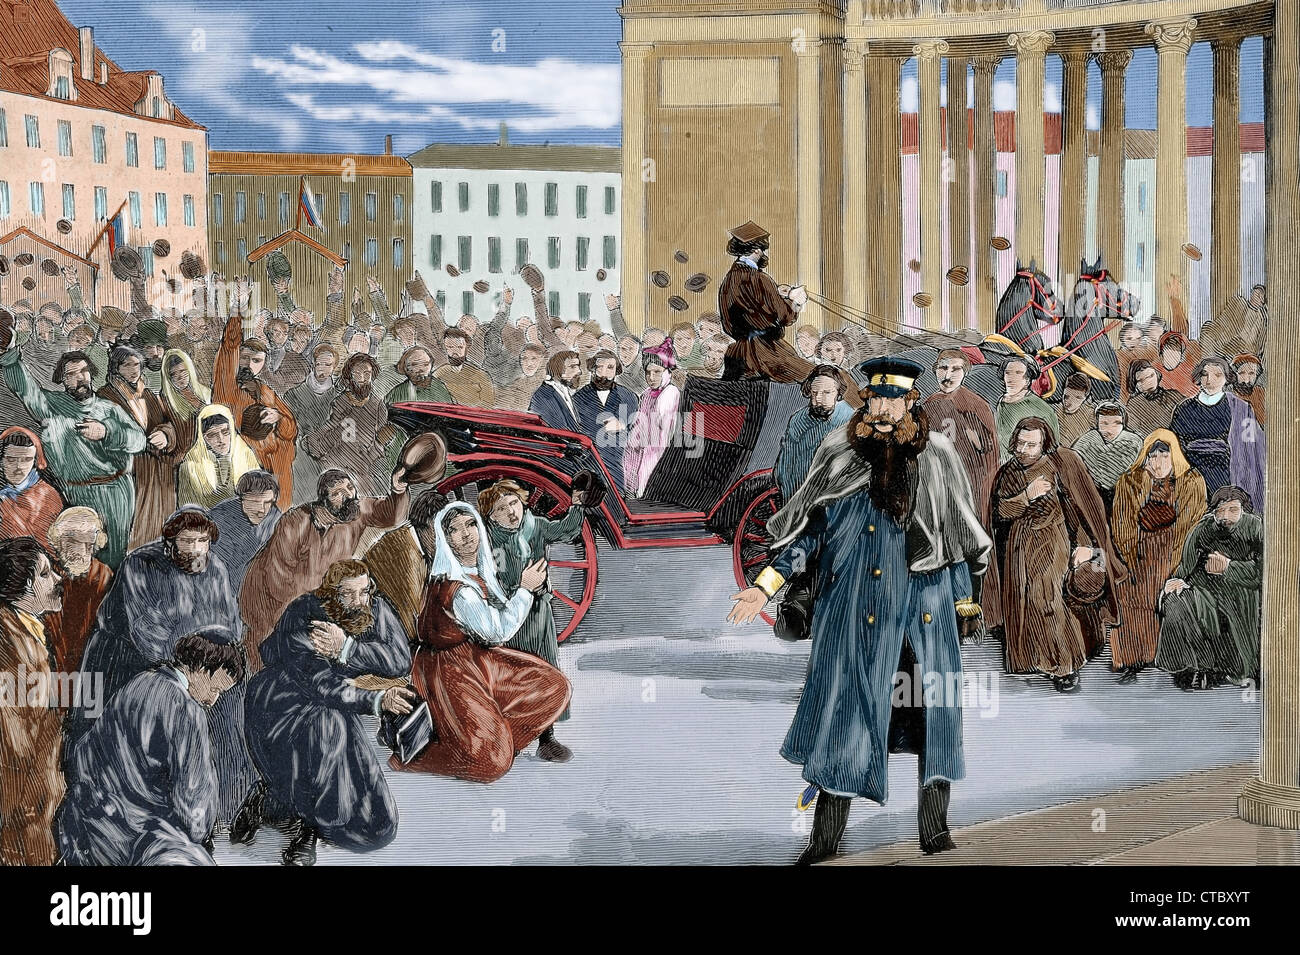 Russia. St. Petersburg. 19th century. Ovation of the people to the Czar after being the victim of an attack. Stock Photo